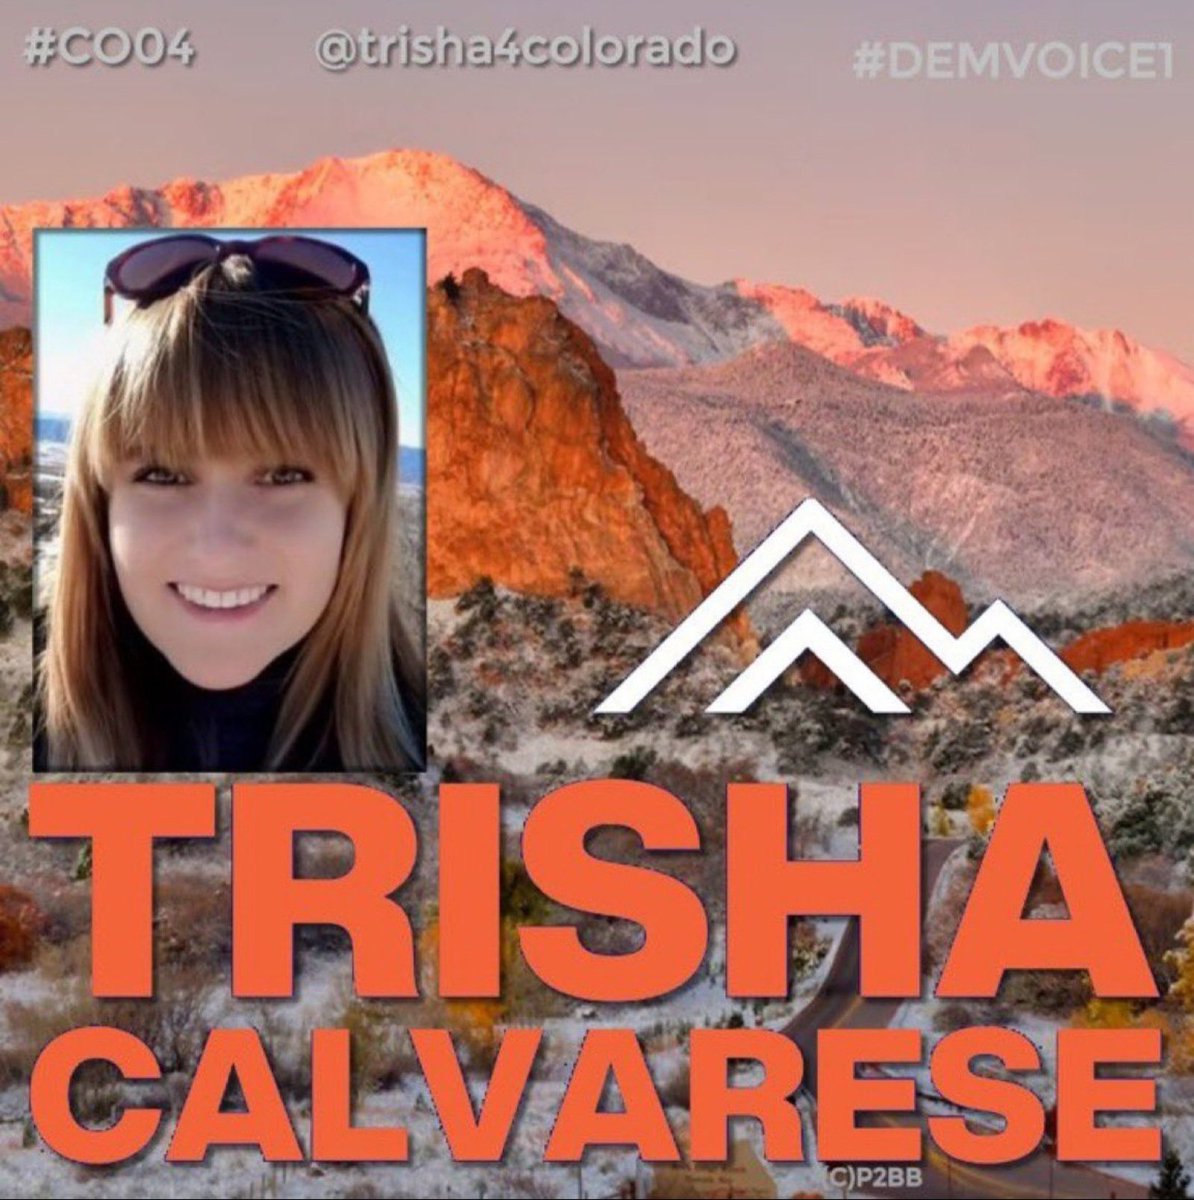 If you live in CO-04, you have a choice for who will represent you in Congress!  Meet Trisha Calvarese trisha4colorado.com, the real Democratic Candidate. Count on her to be a caring and serious voice for Eastern Colorado!

Let's Help Trisha Win!

#DemVoice1. #VoteBIGBlue